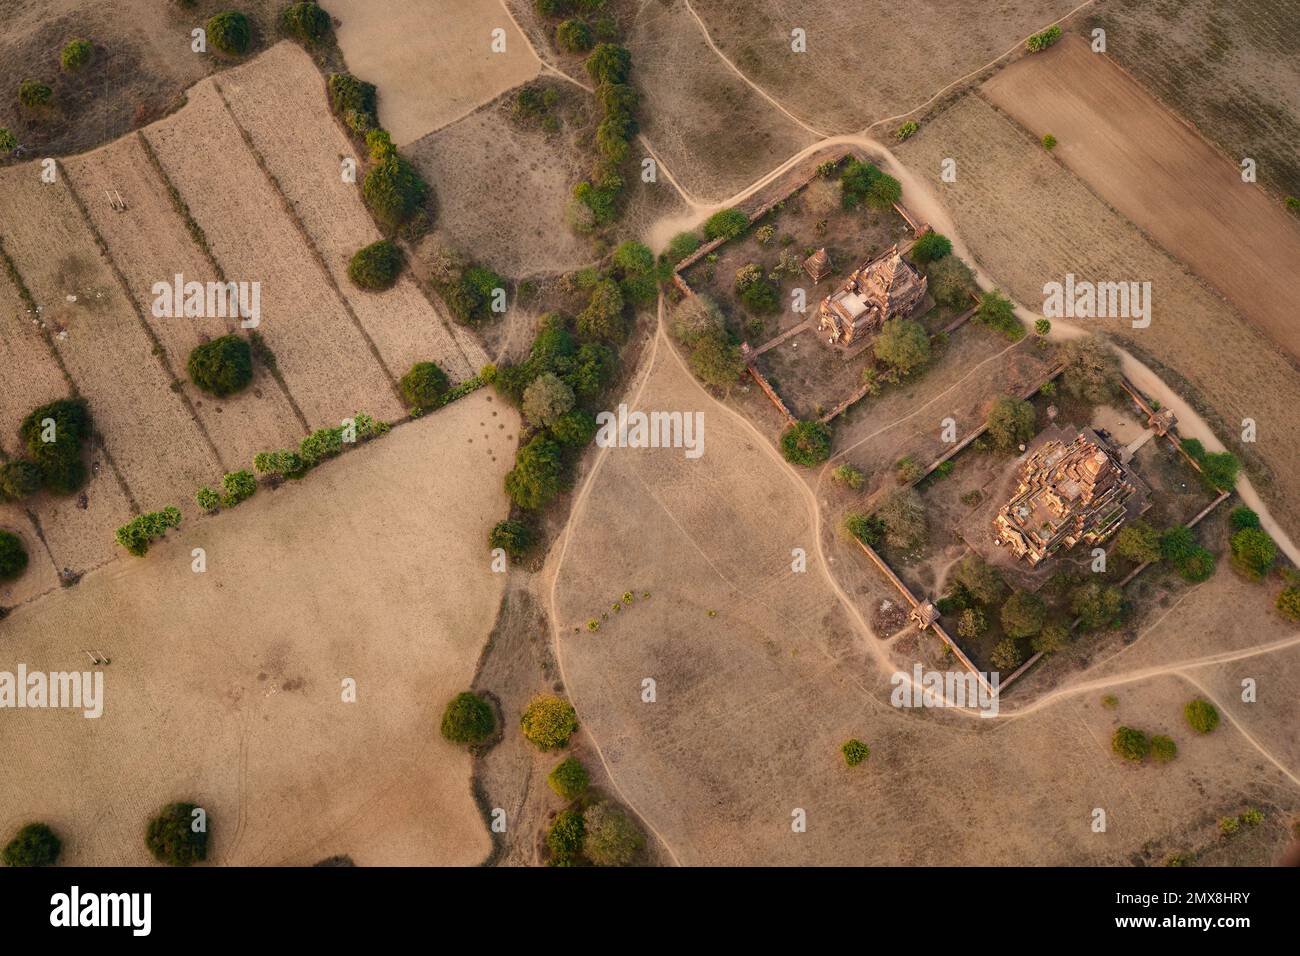 A pair of ancient temples and a dirt road in a rural landscape as viewed from above in Bagan, Myanmar (Burma). Stock Photo